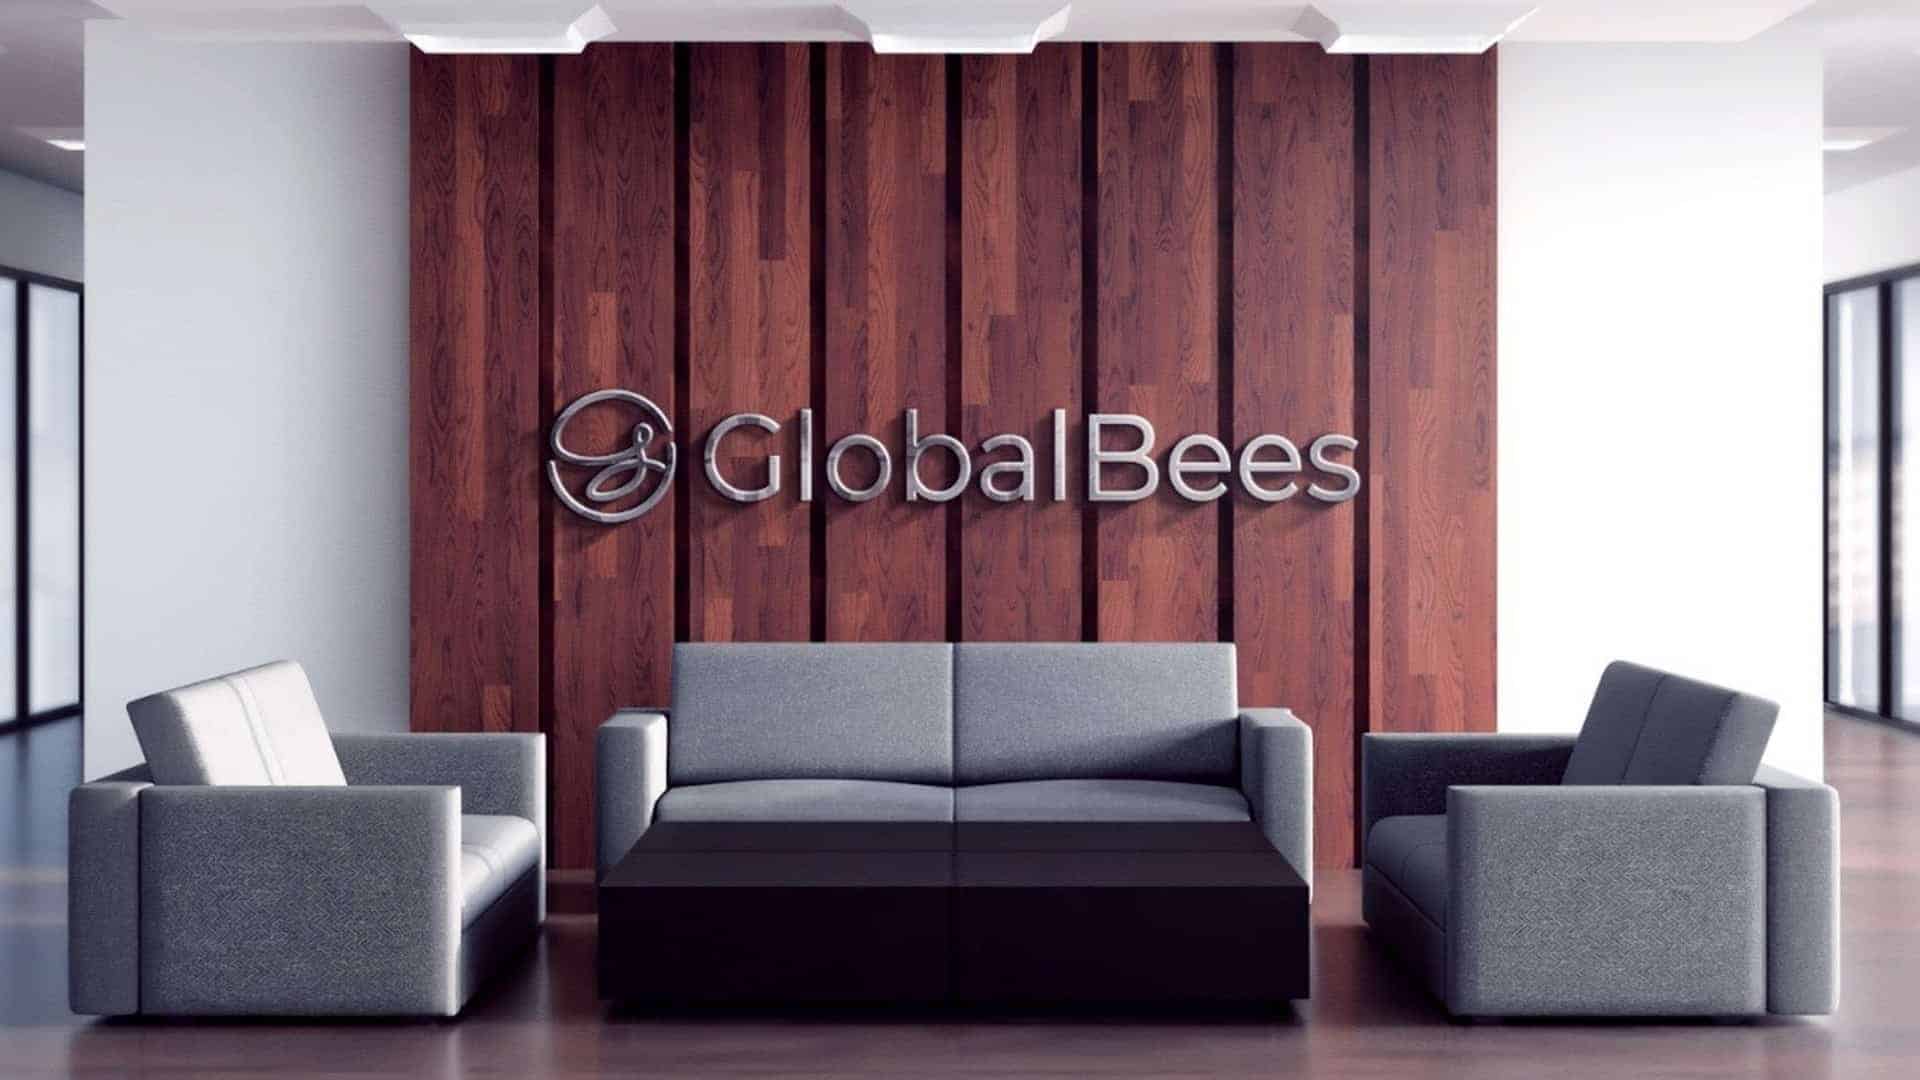 GlobalBees acquires women health startup andMe